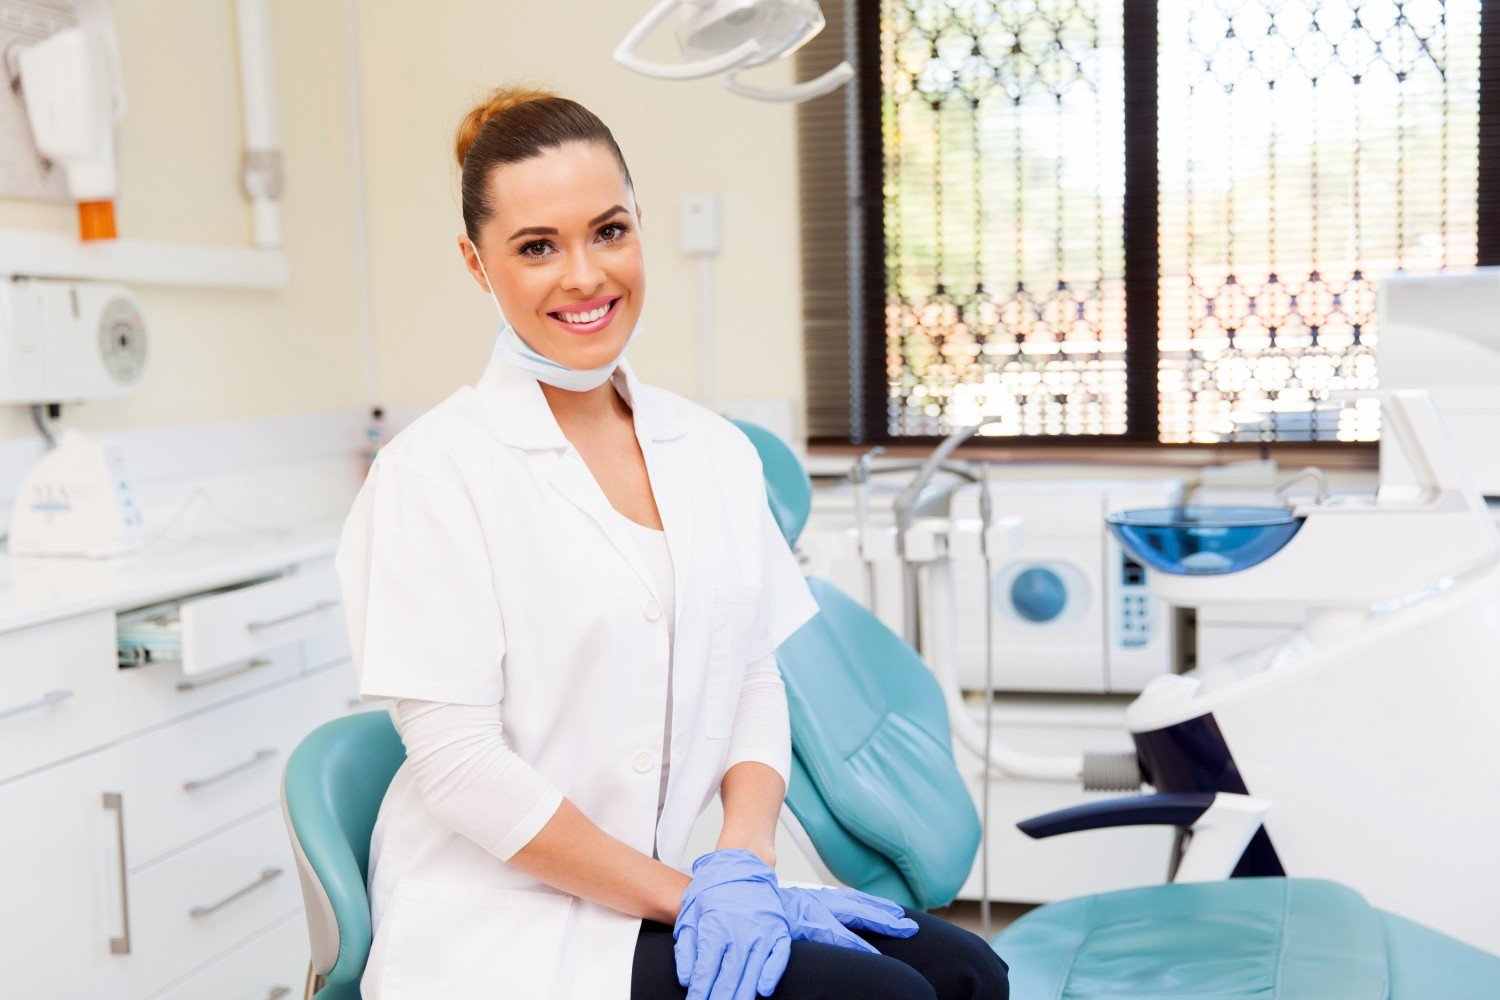 Why You Should Consider Becoming A Dental Hygienist